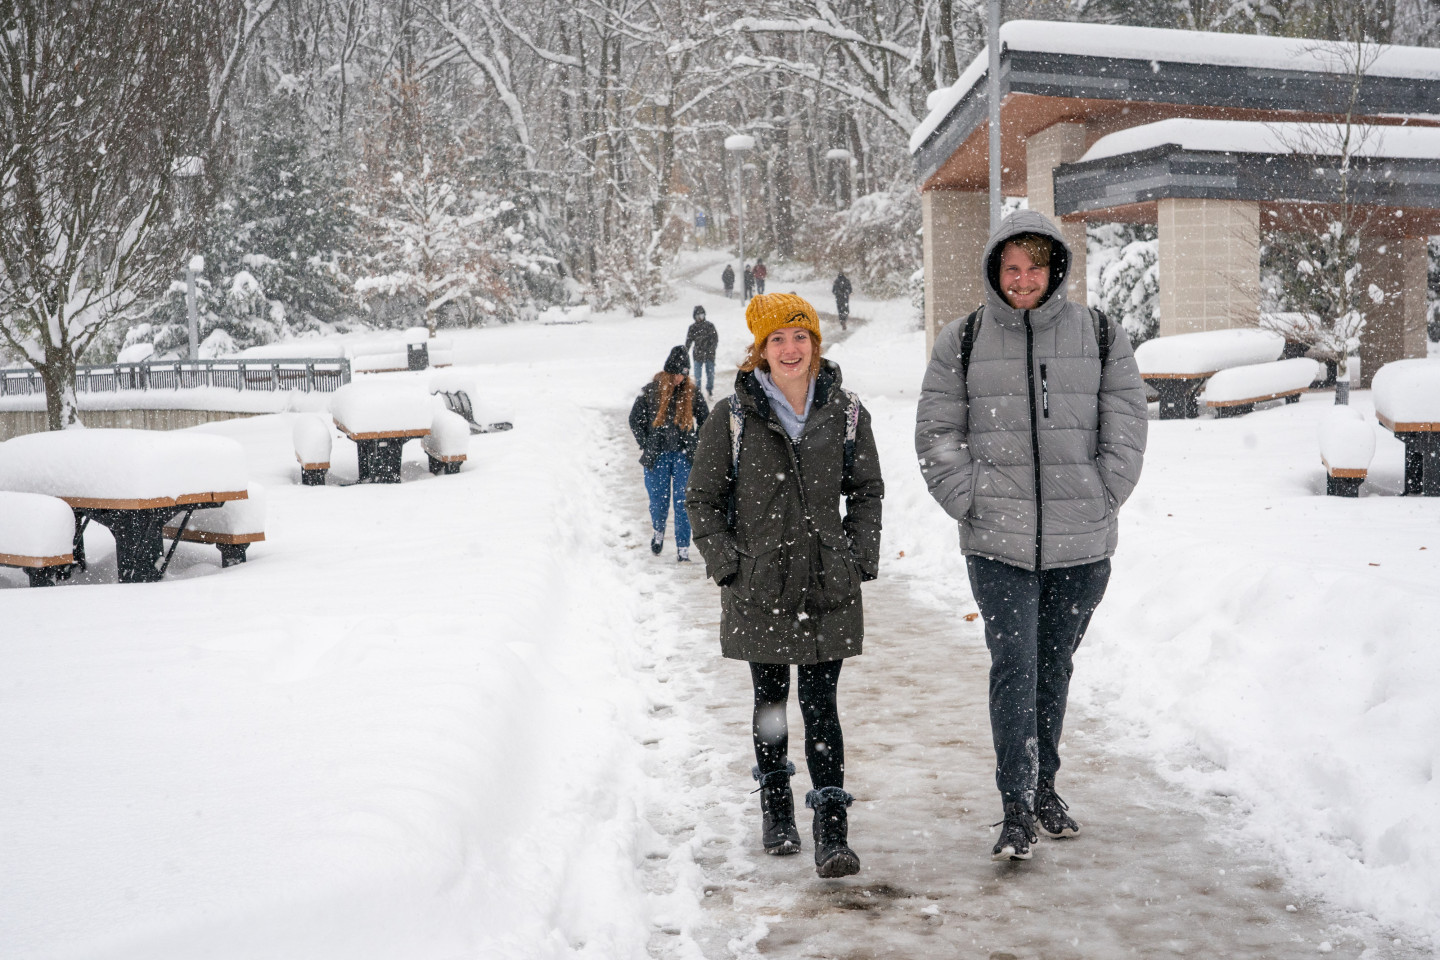 Students walking in the snow on campus.